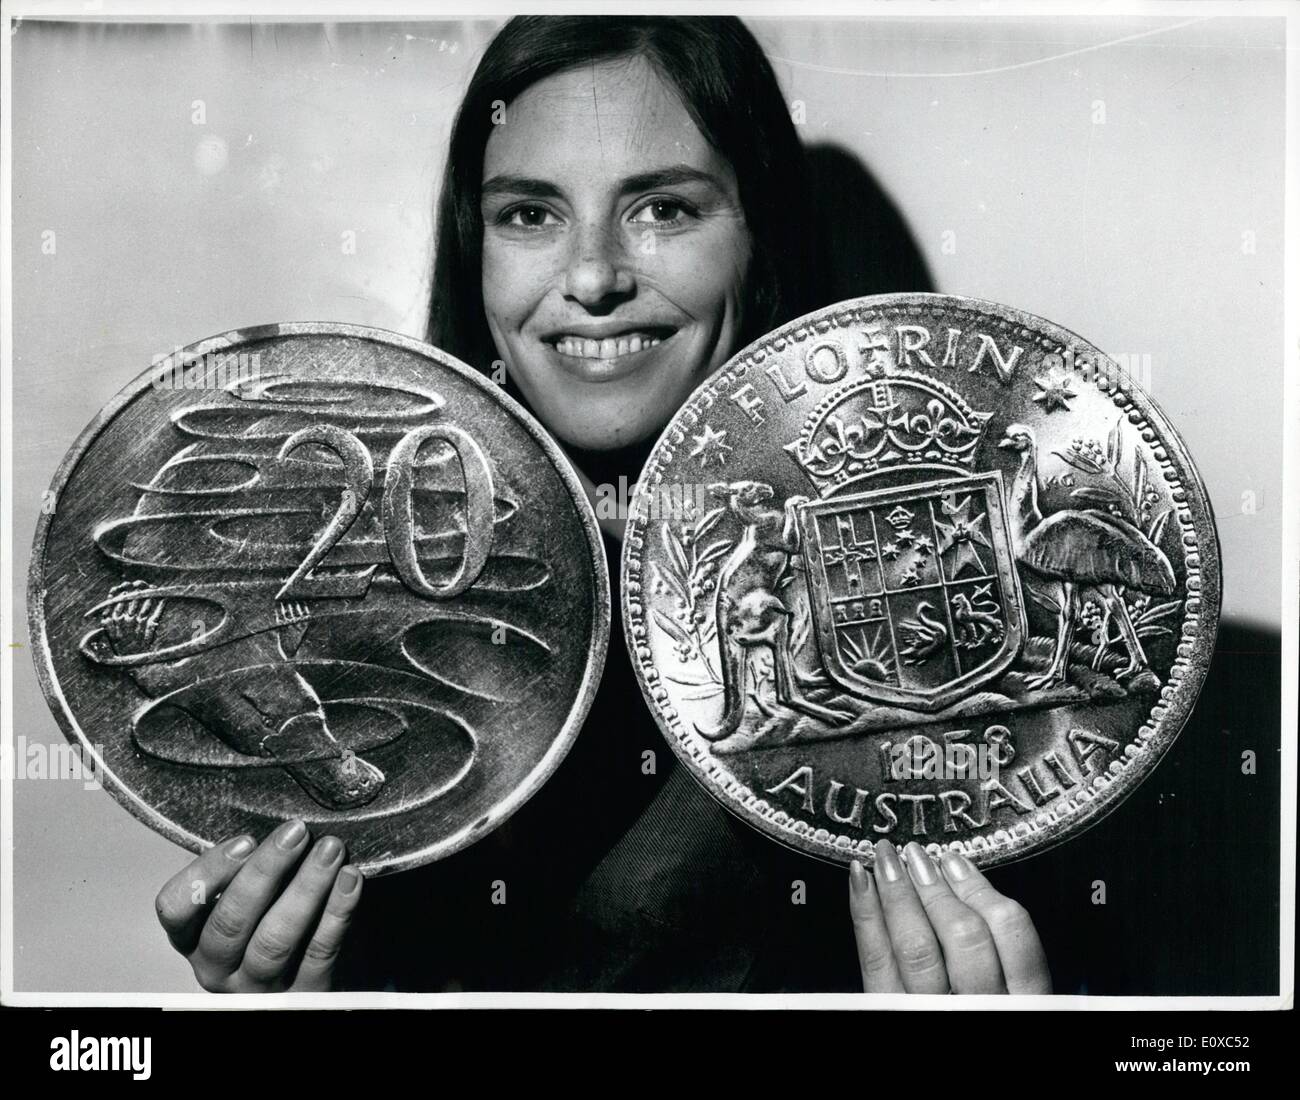 Feb. 02, 1966 - Decimal currency in Australia: Australia's change to decimal currency in February, 1966, was a major event. Above are replicas of the new 20 cent coin and two shilling piece, which are used in illustrating the new and old coins. Stock Photo